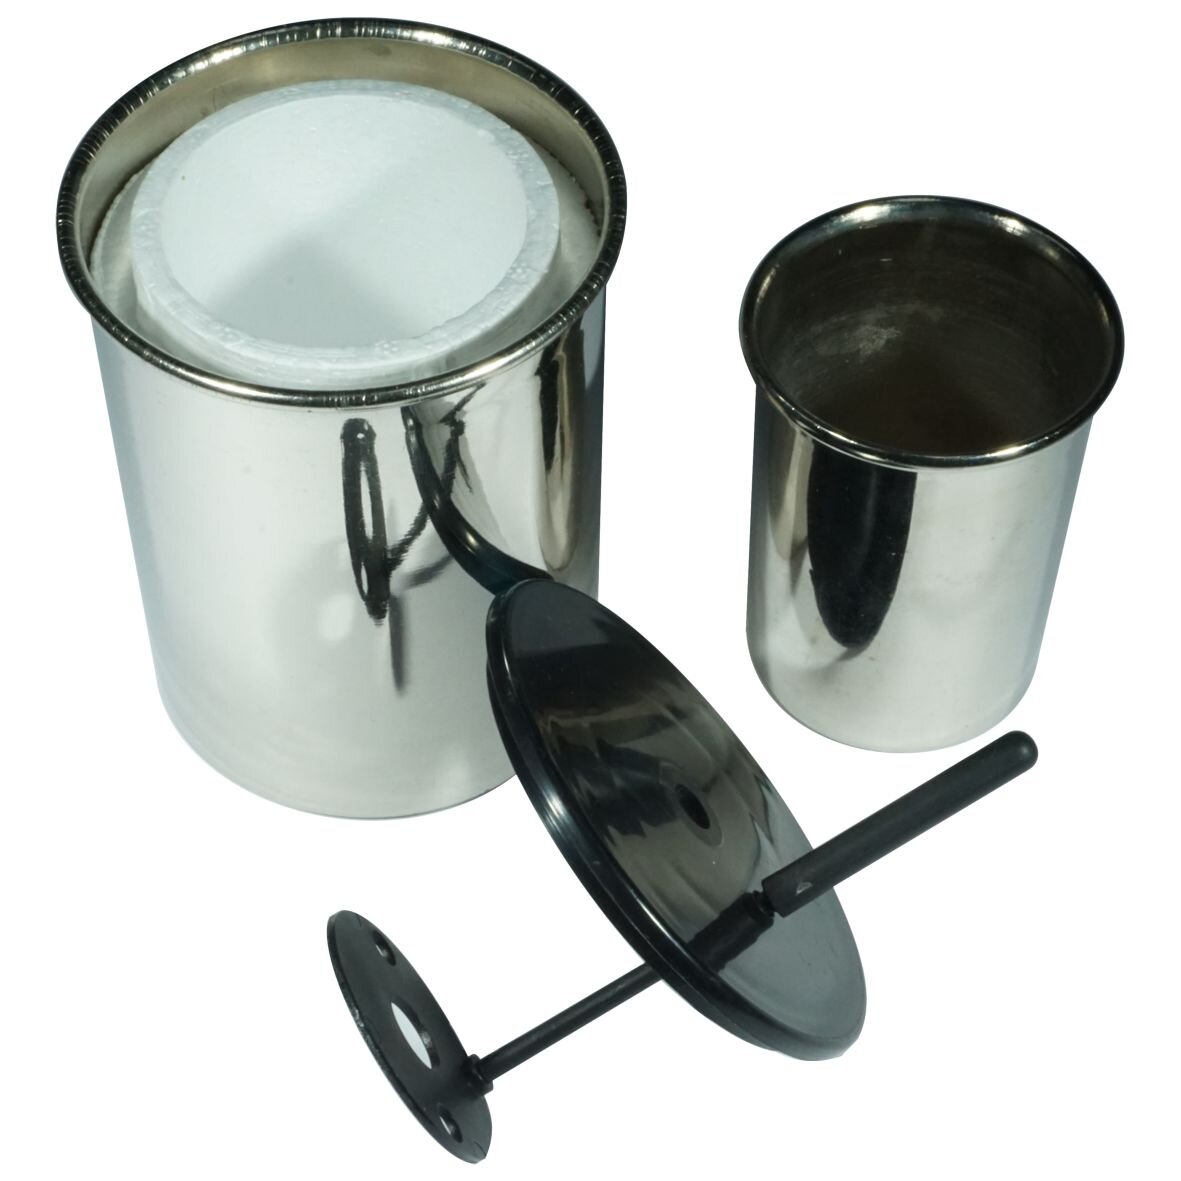 HL0820-001 Calorimeter Cup Pair Inner Outer with Lid & Stirrer.jpg